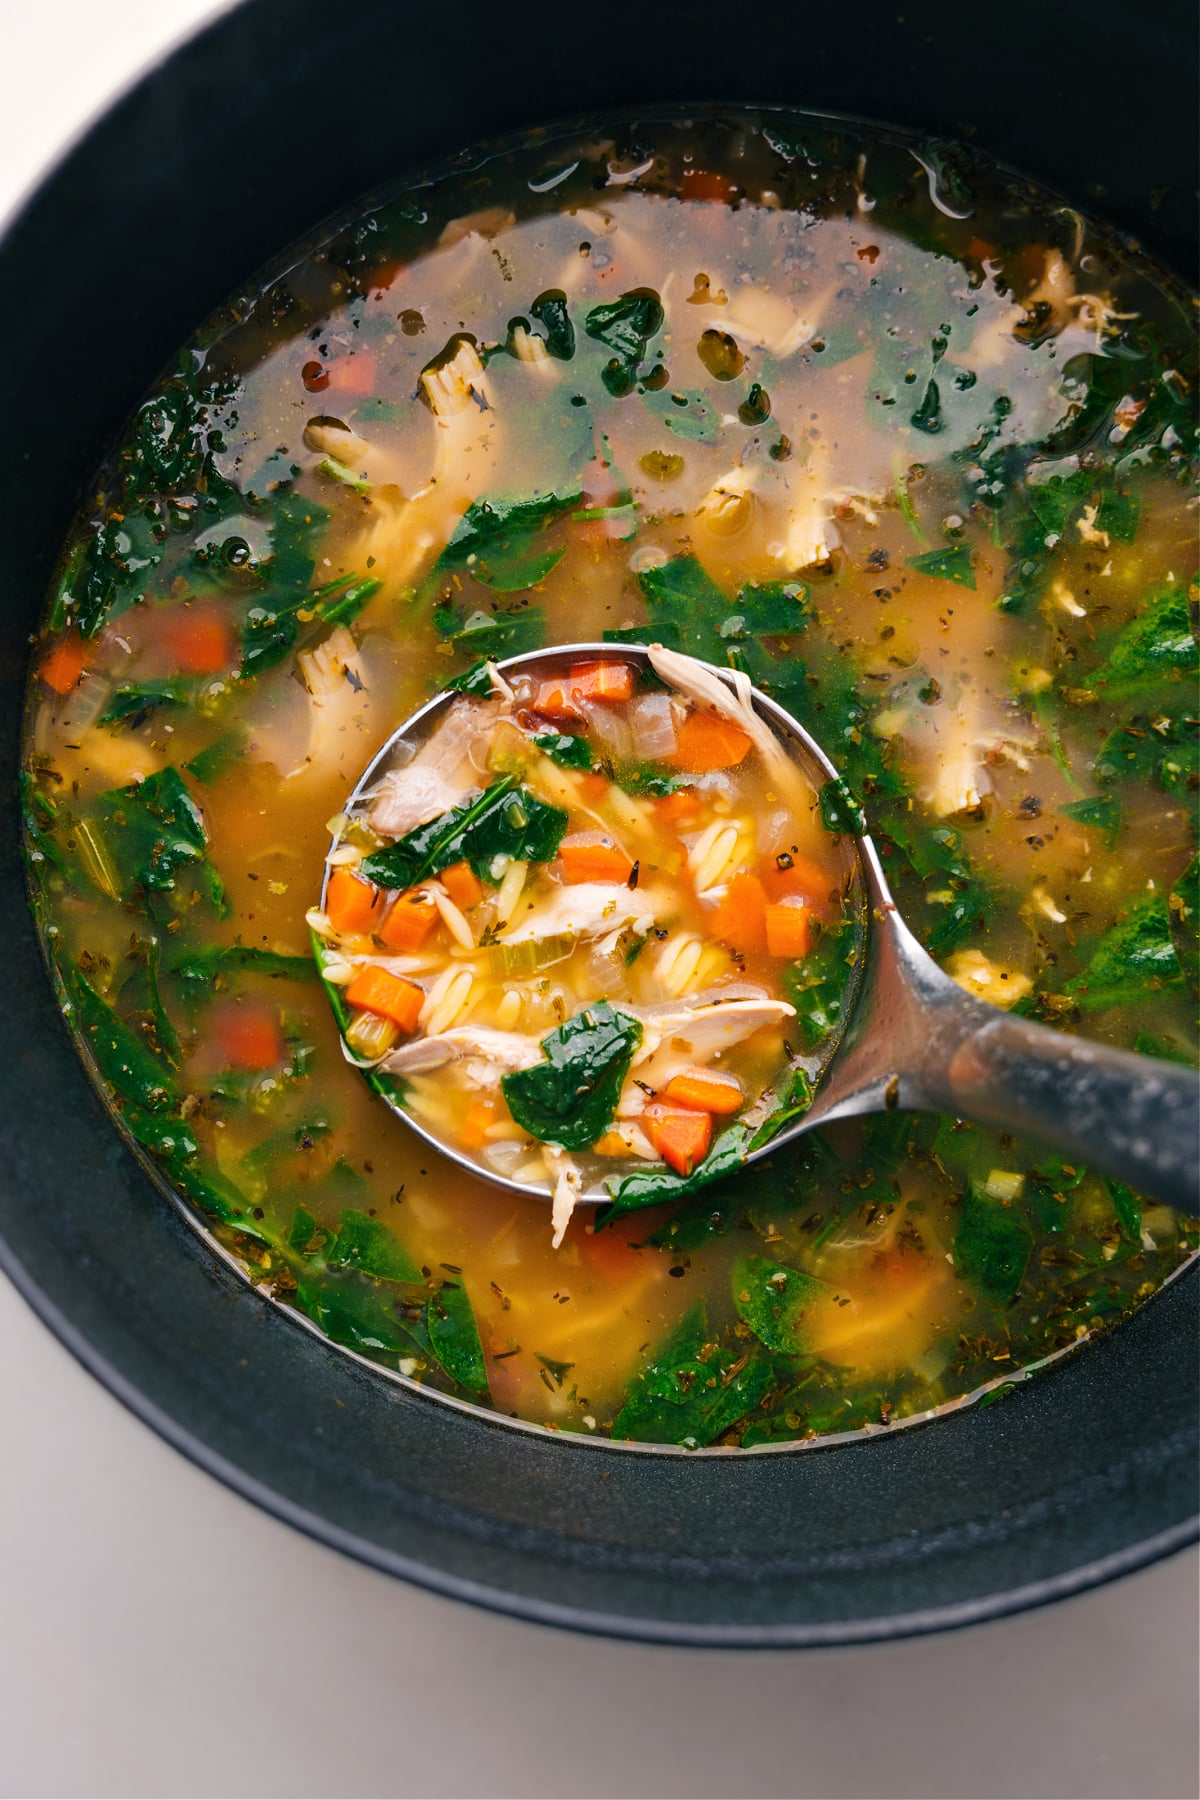 Steaming lemon chicken orzo soup in a pot, with a ladle serving a portion rich with ingredients.